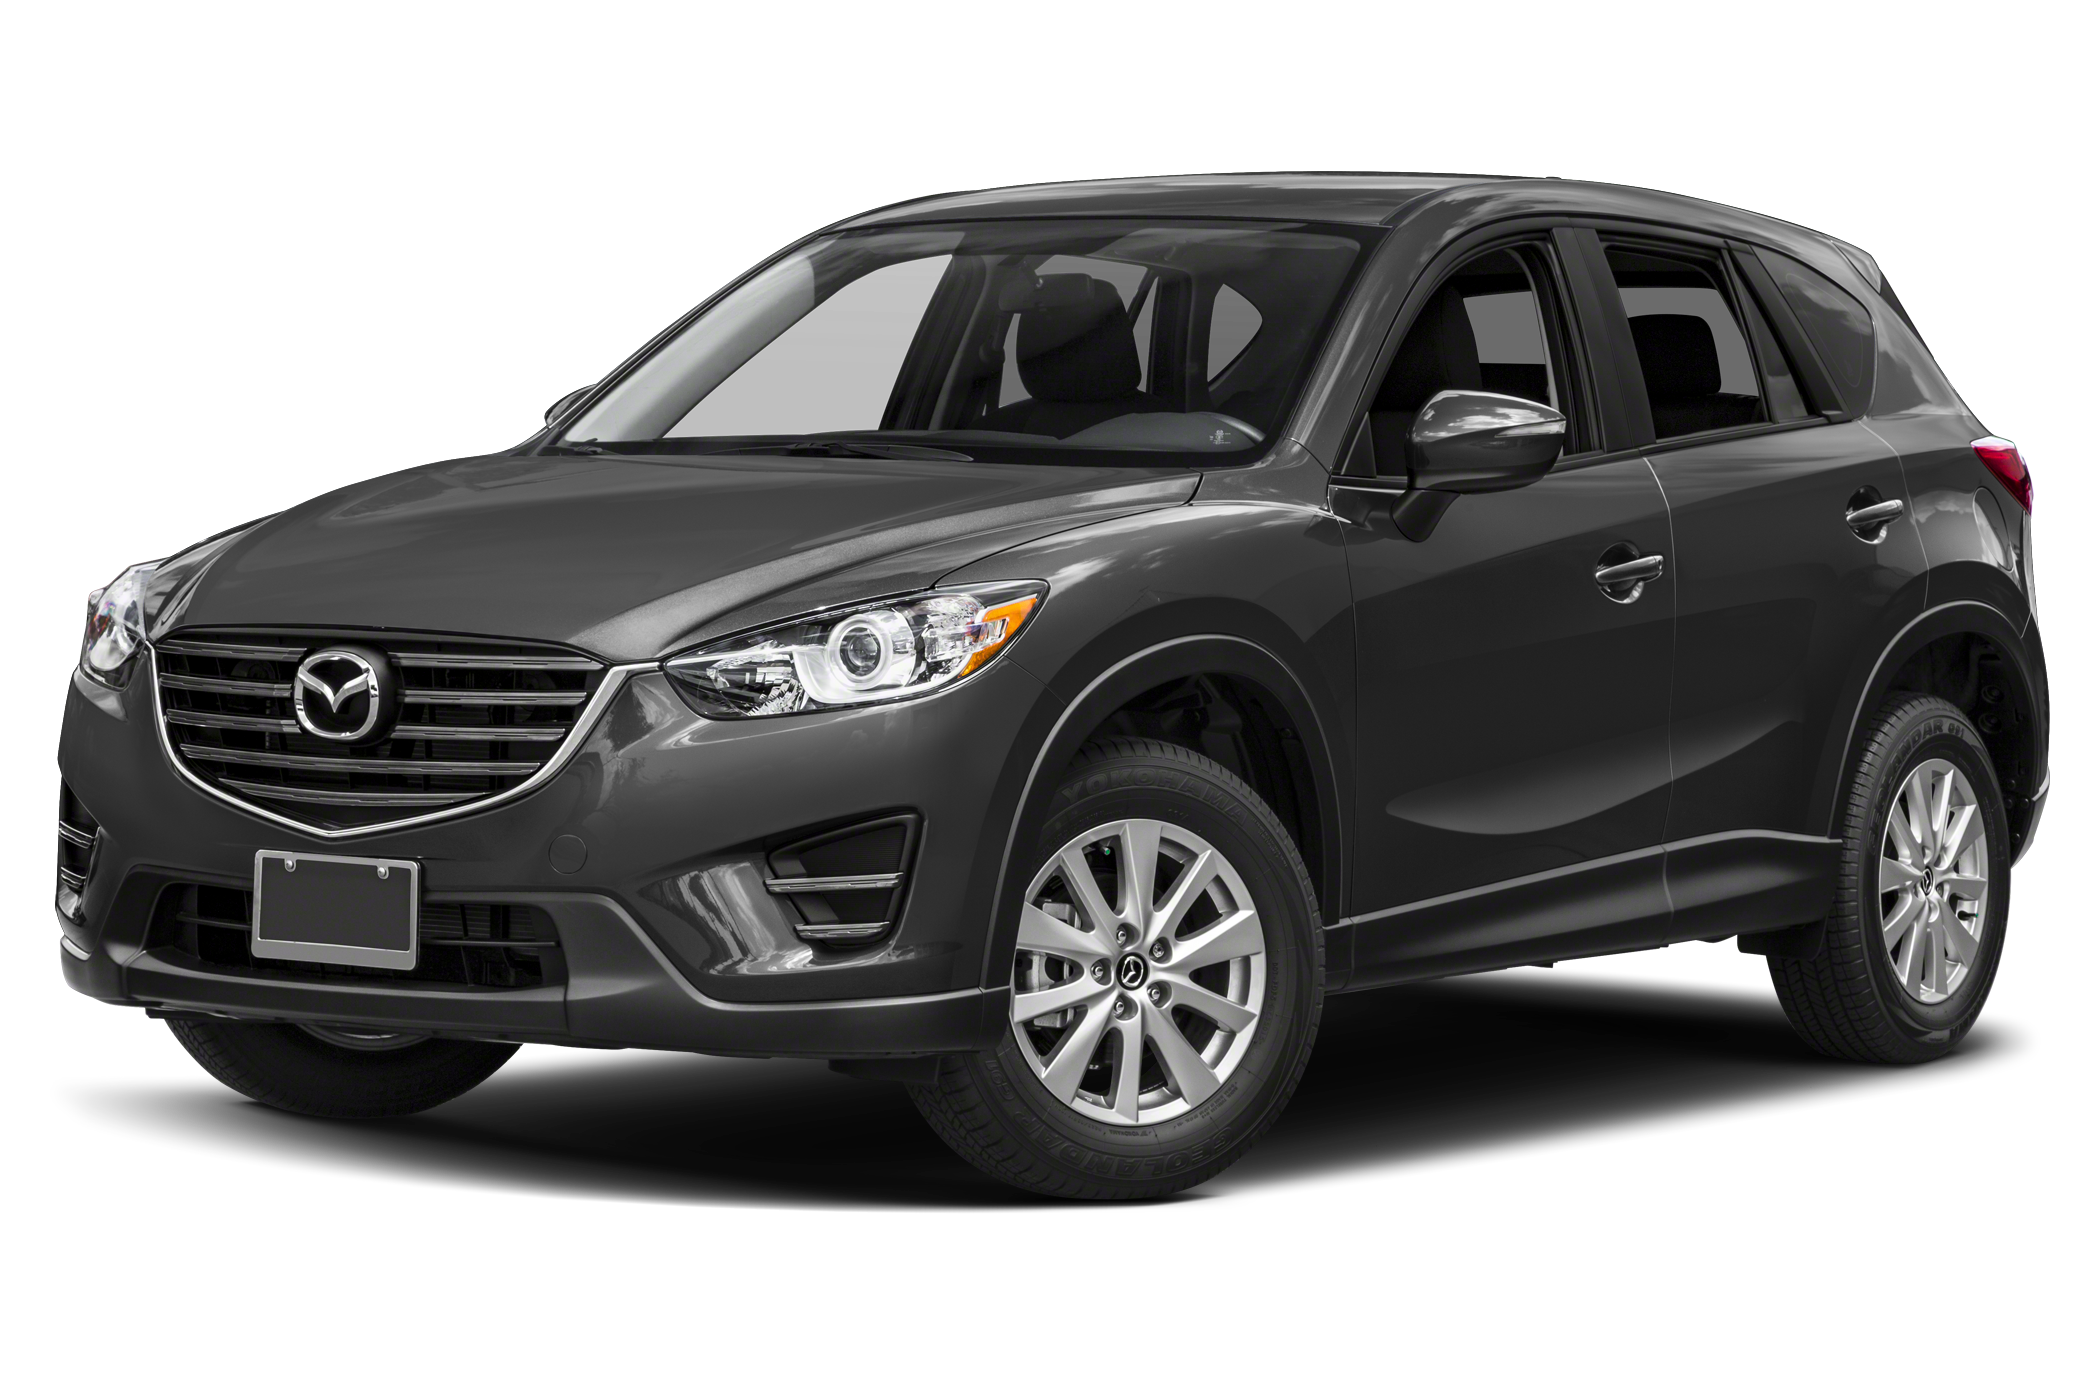 The Proper Way To Detail Your Mazda CX-5